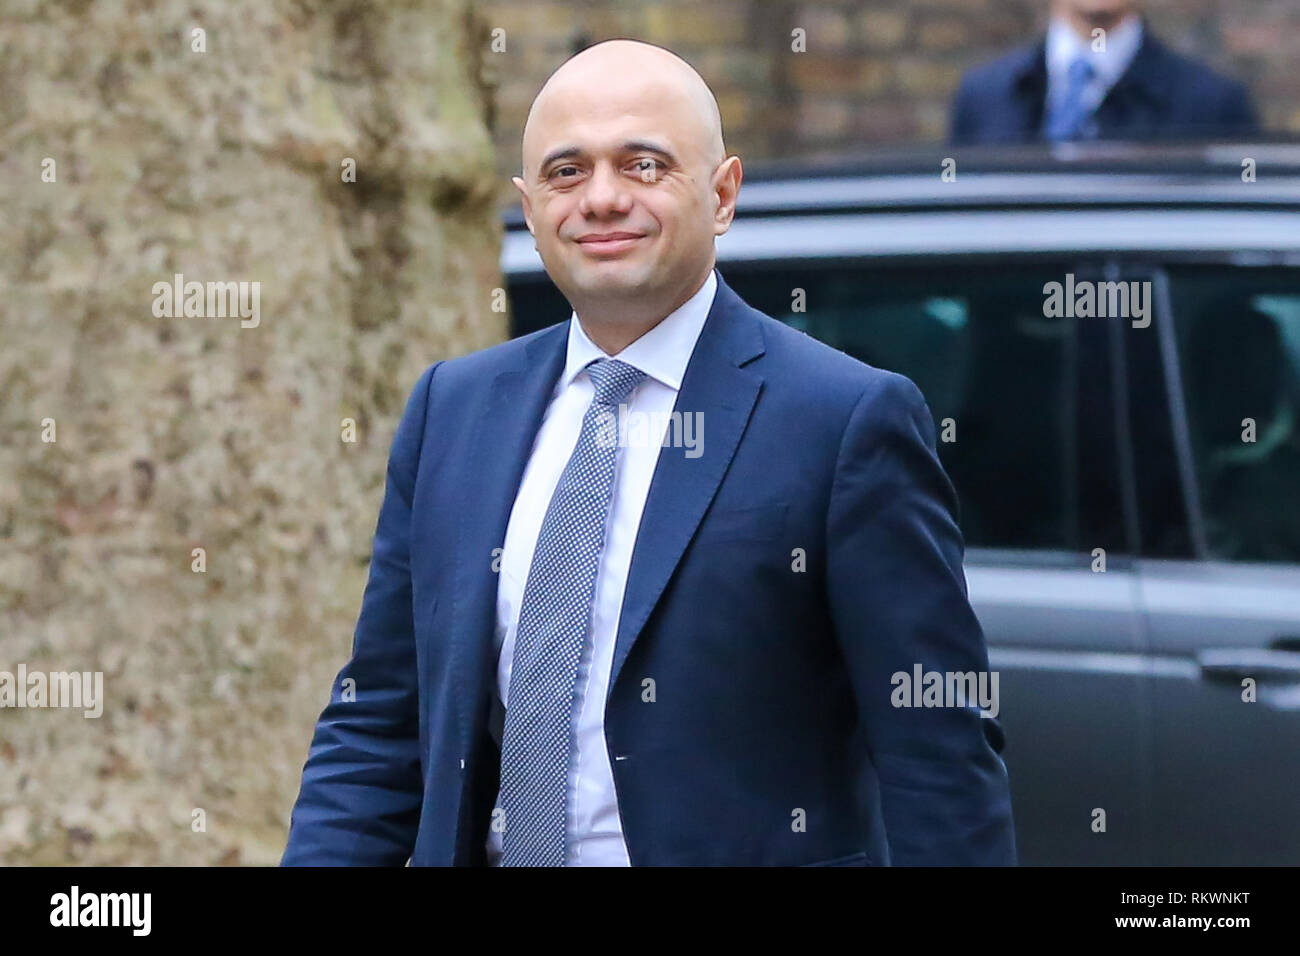 Downing Street, London, UK 12 Feb 2019 - Sajid Javid - Home Secretary arrives in Downing Street for the weekly Cabinet meeting.   Credit: Dinendra Haria/Alamy Live News Stock Photo